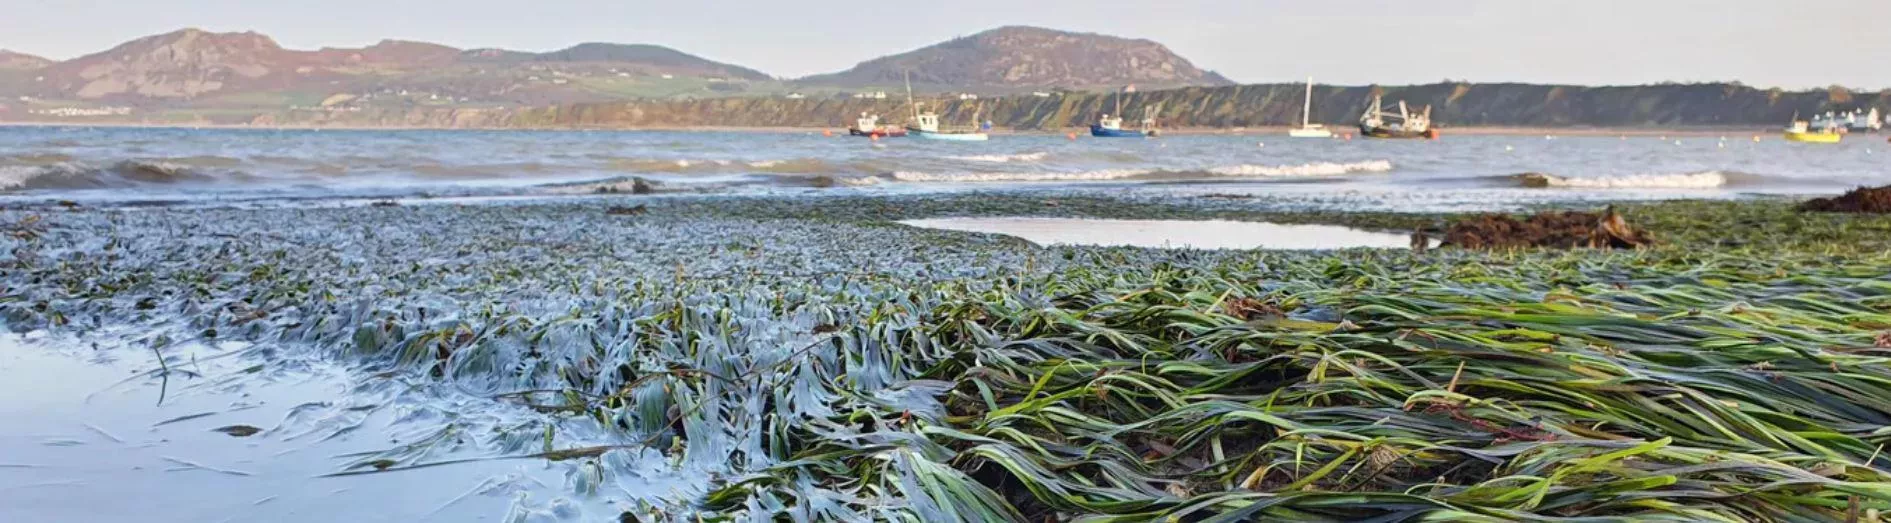 Seagrass in Wales